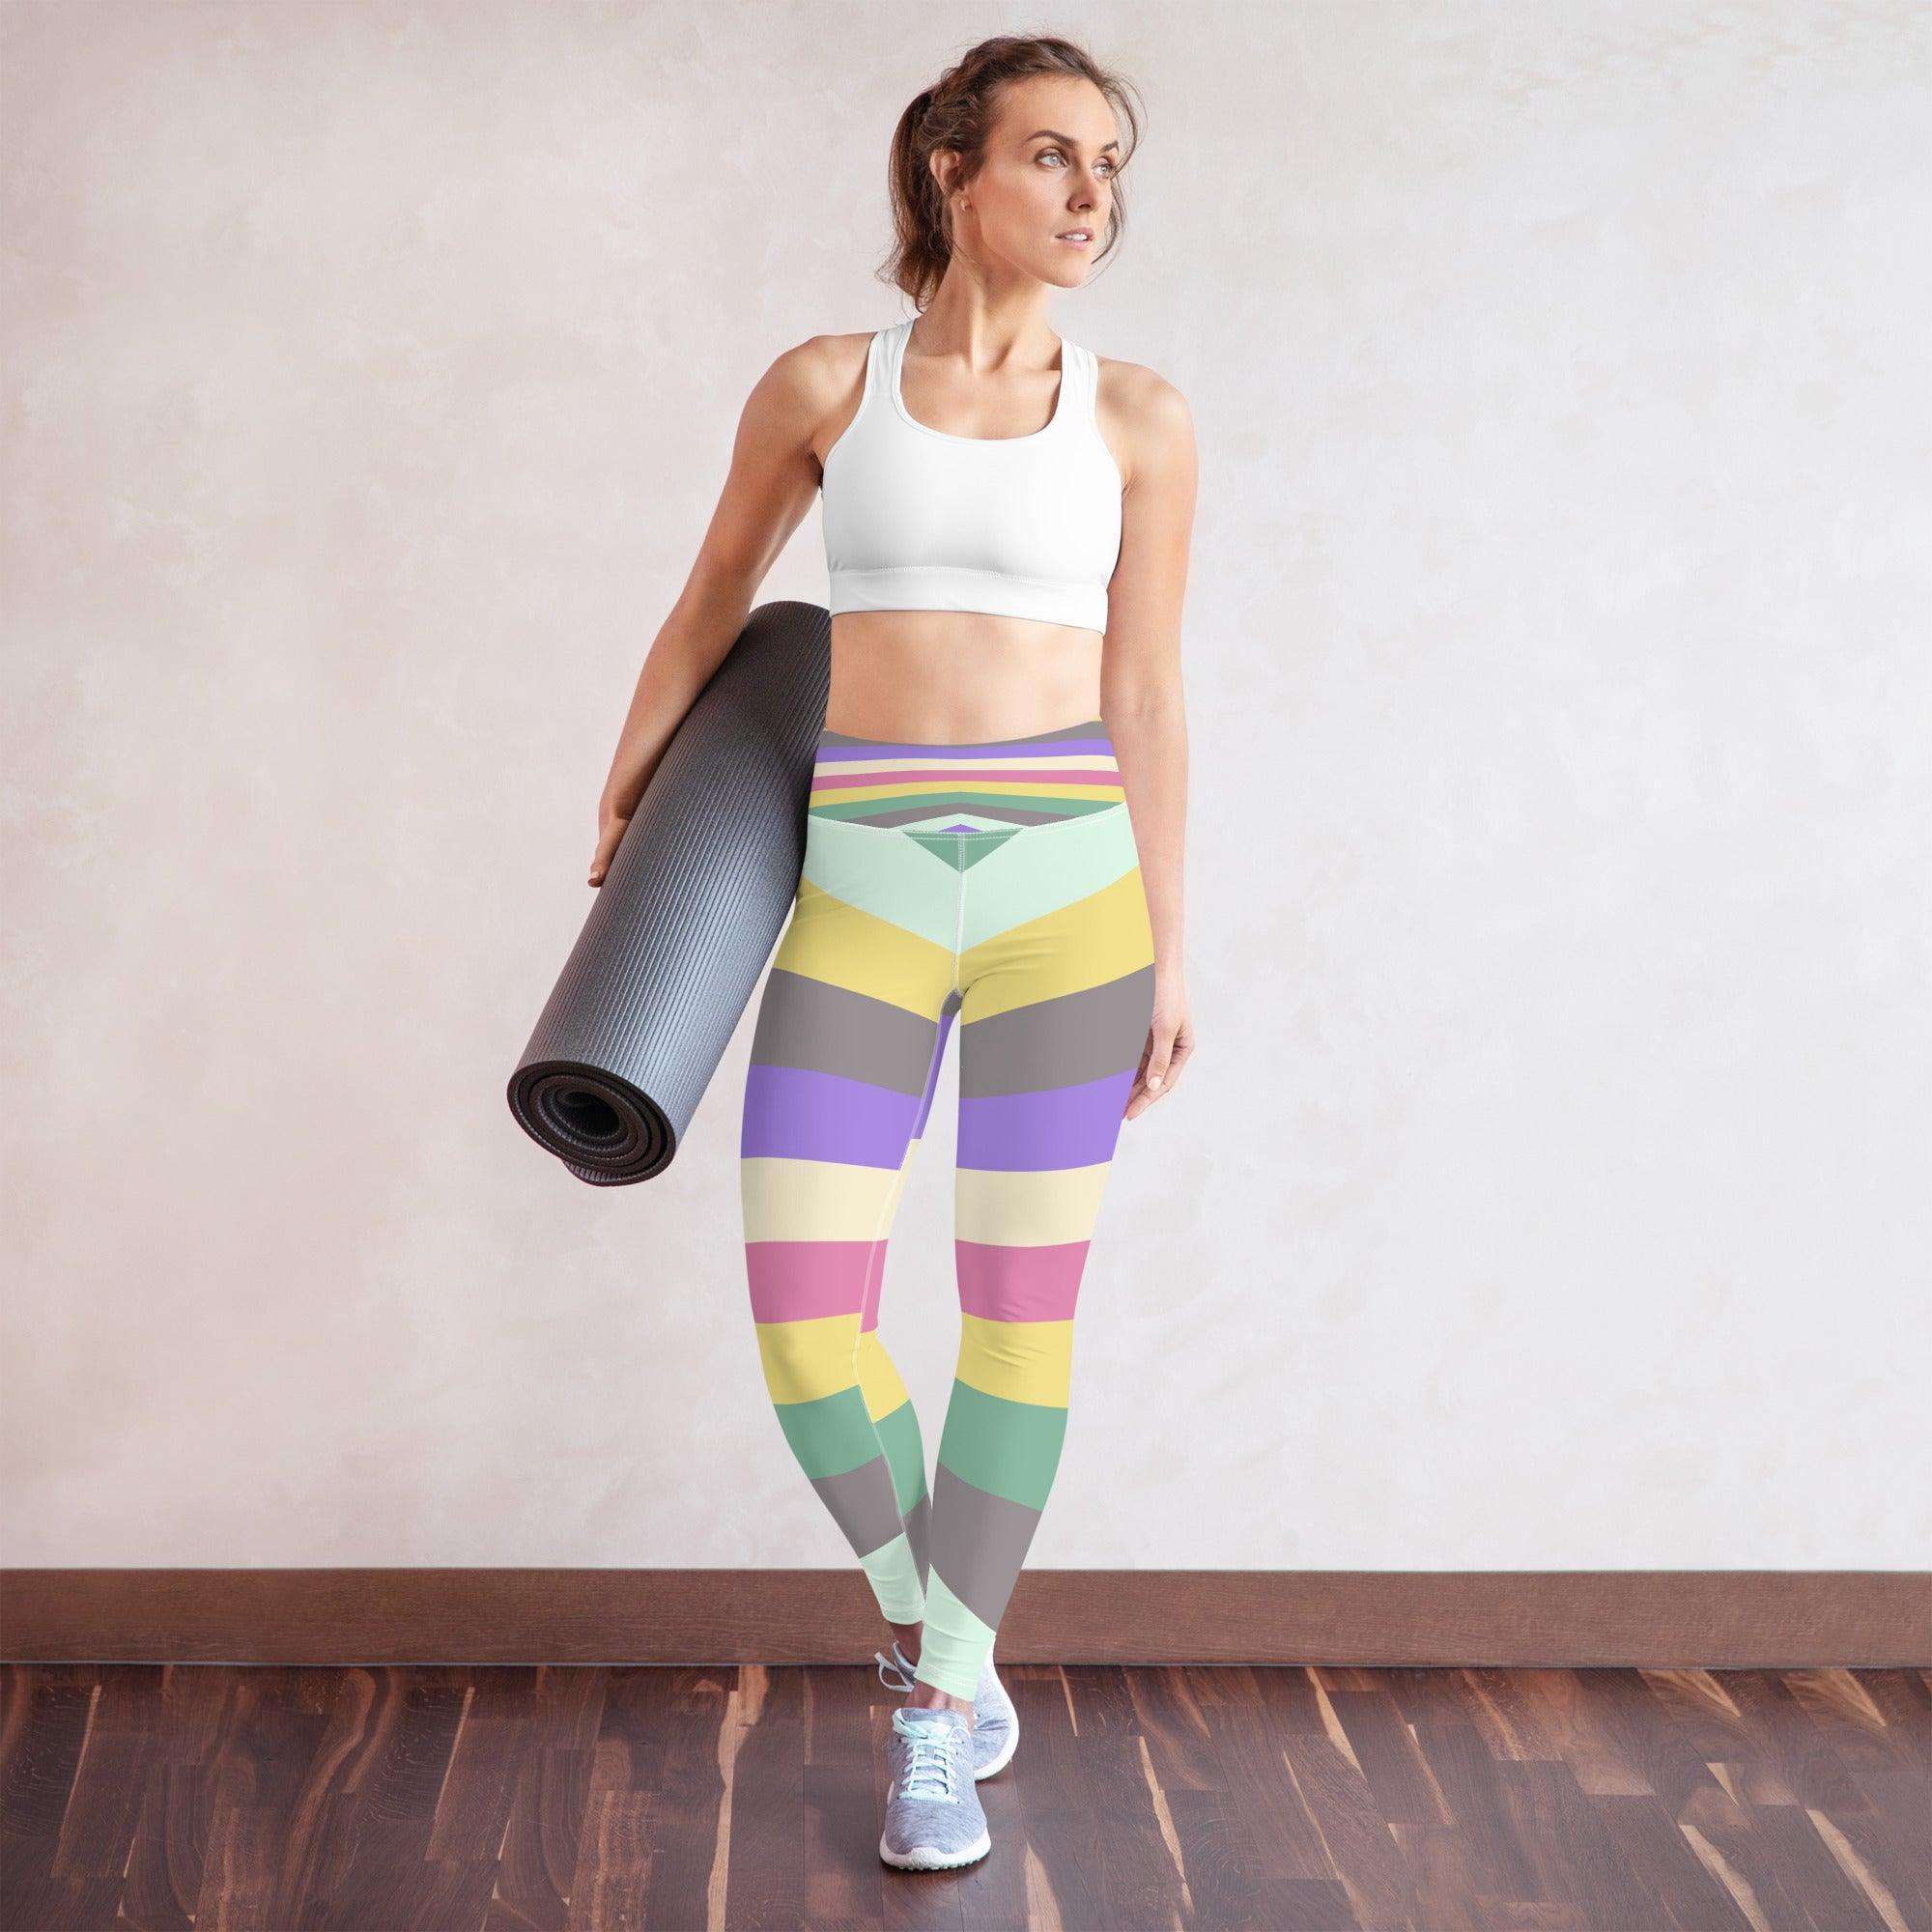 Phychedelic Light Lines Yoga Leggings - Beyond T-shirts